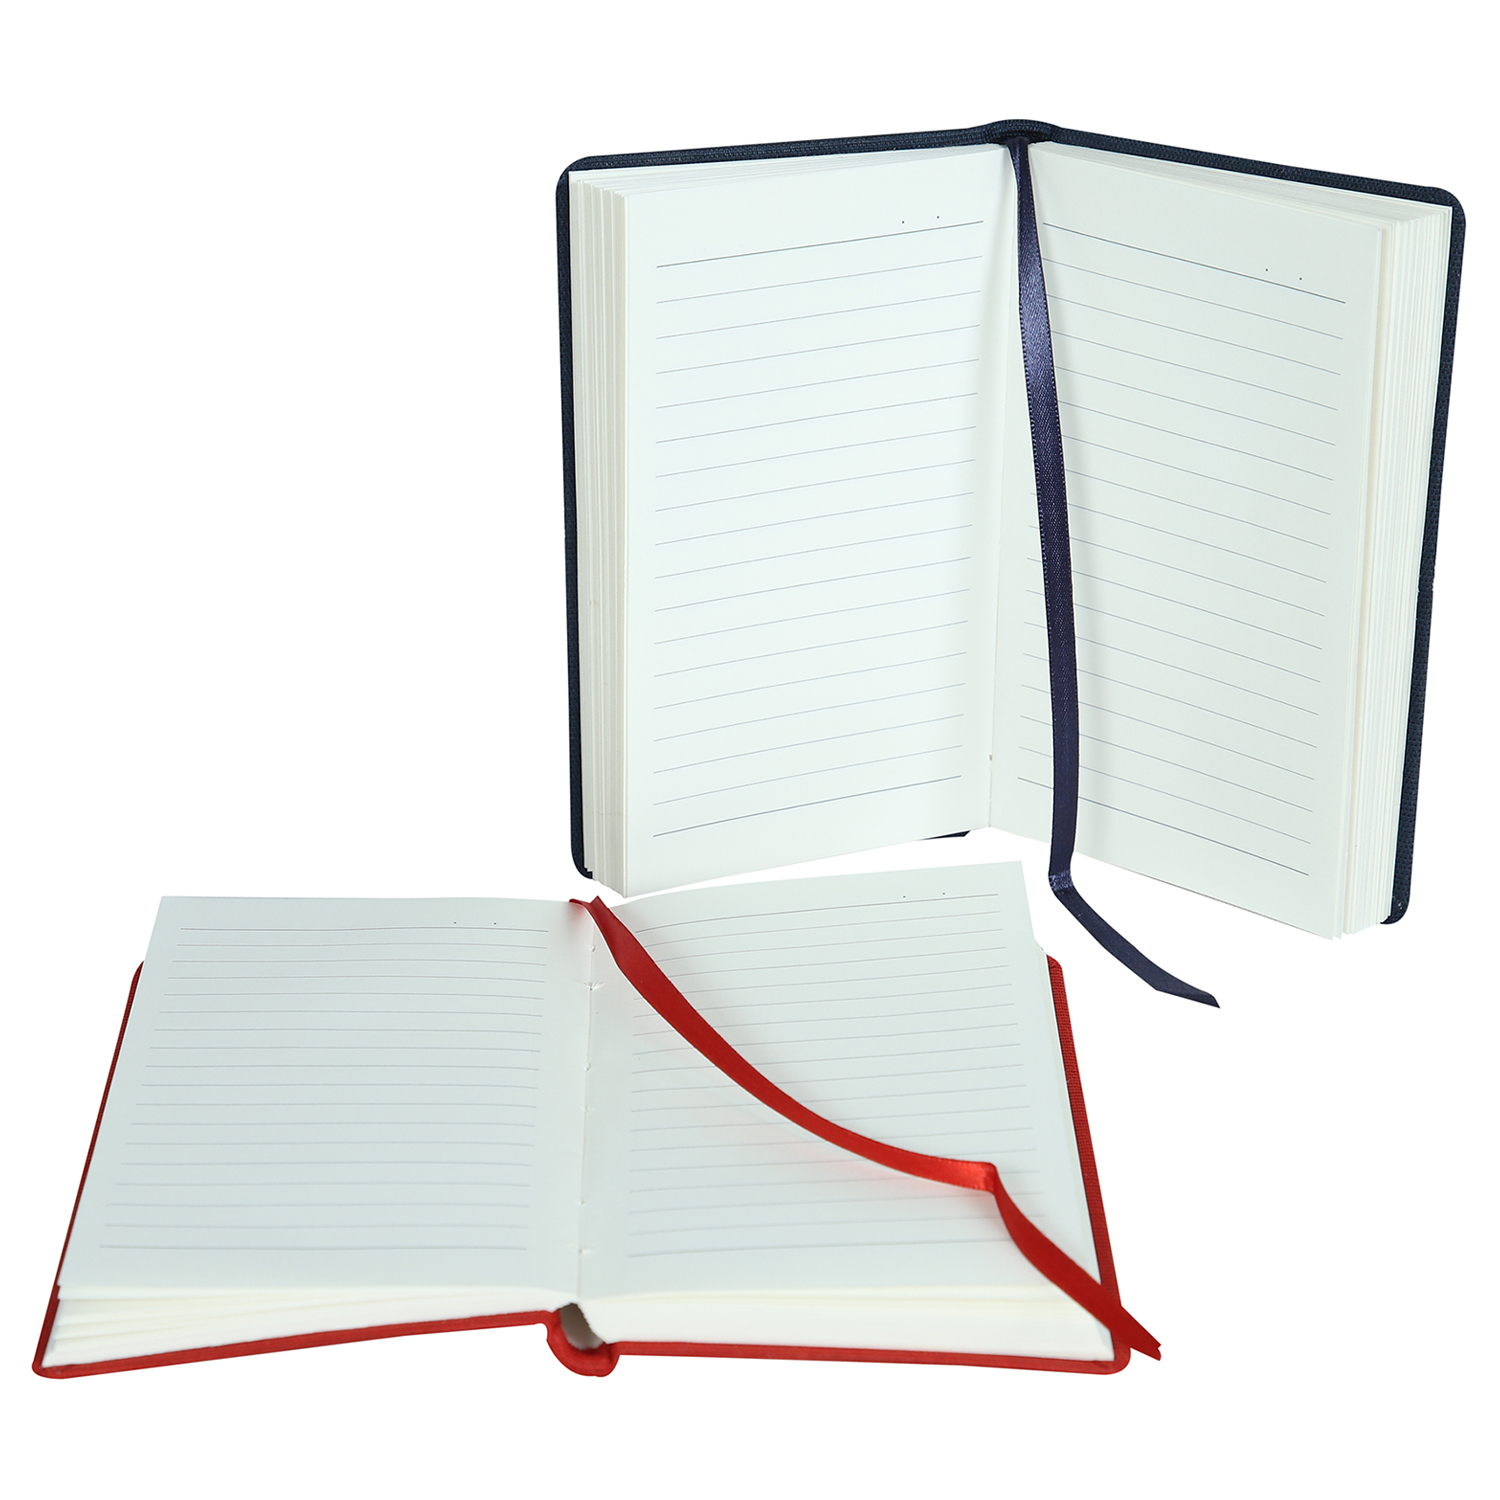 Comma Regina - A6 Size - Hard Bound Notebook (Navy Blue and Red)